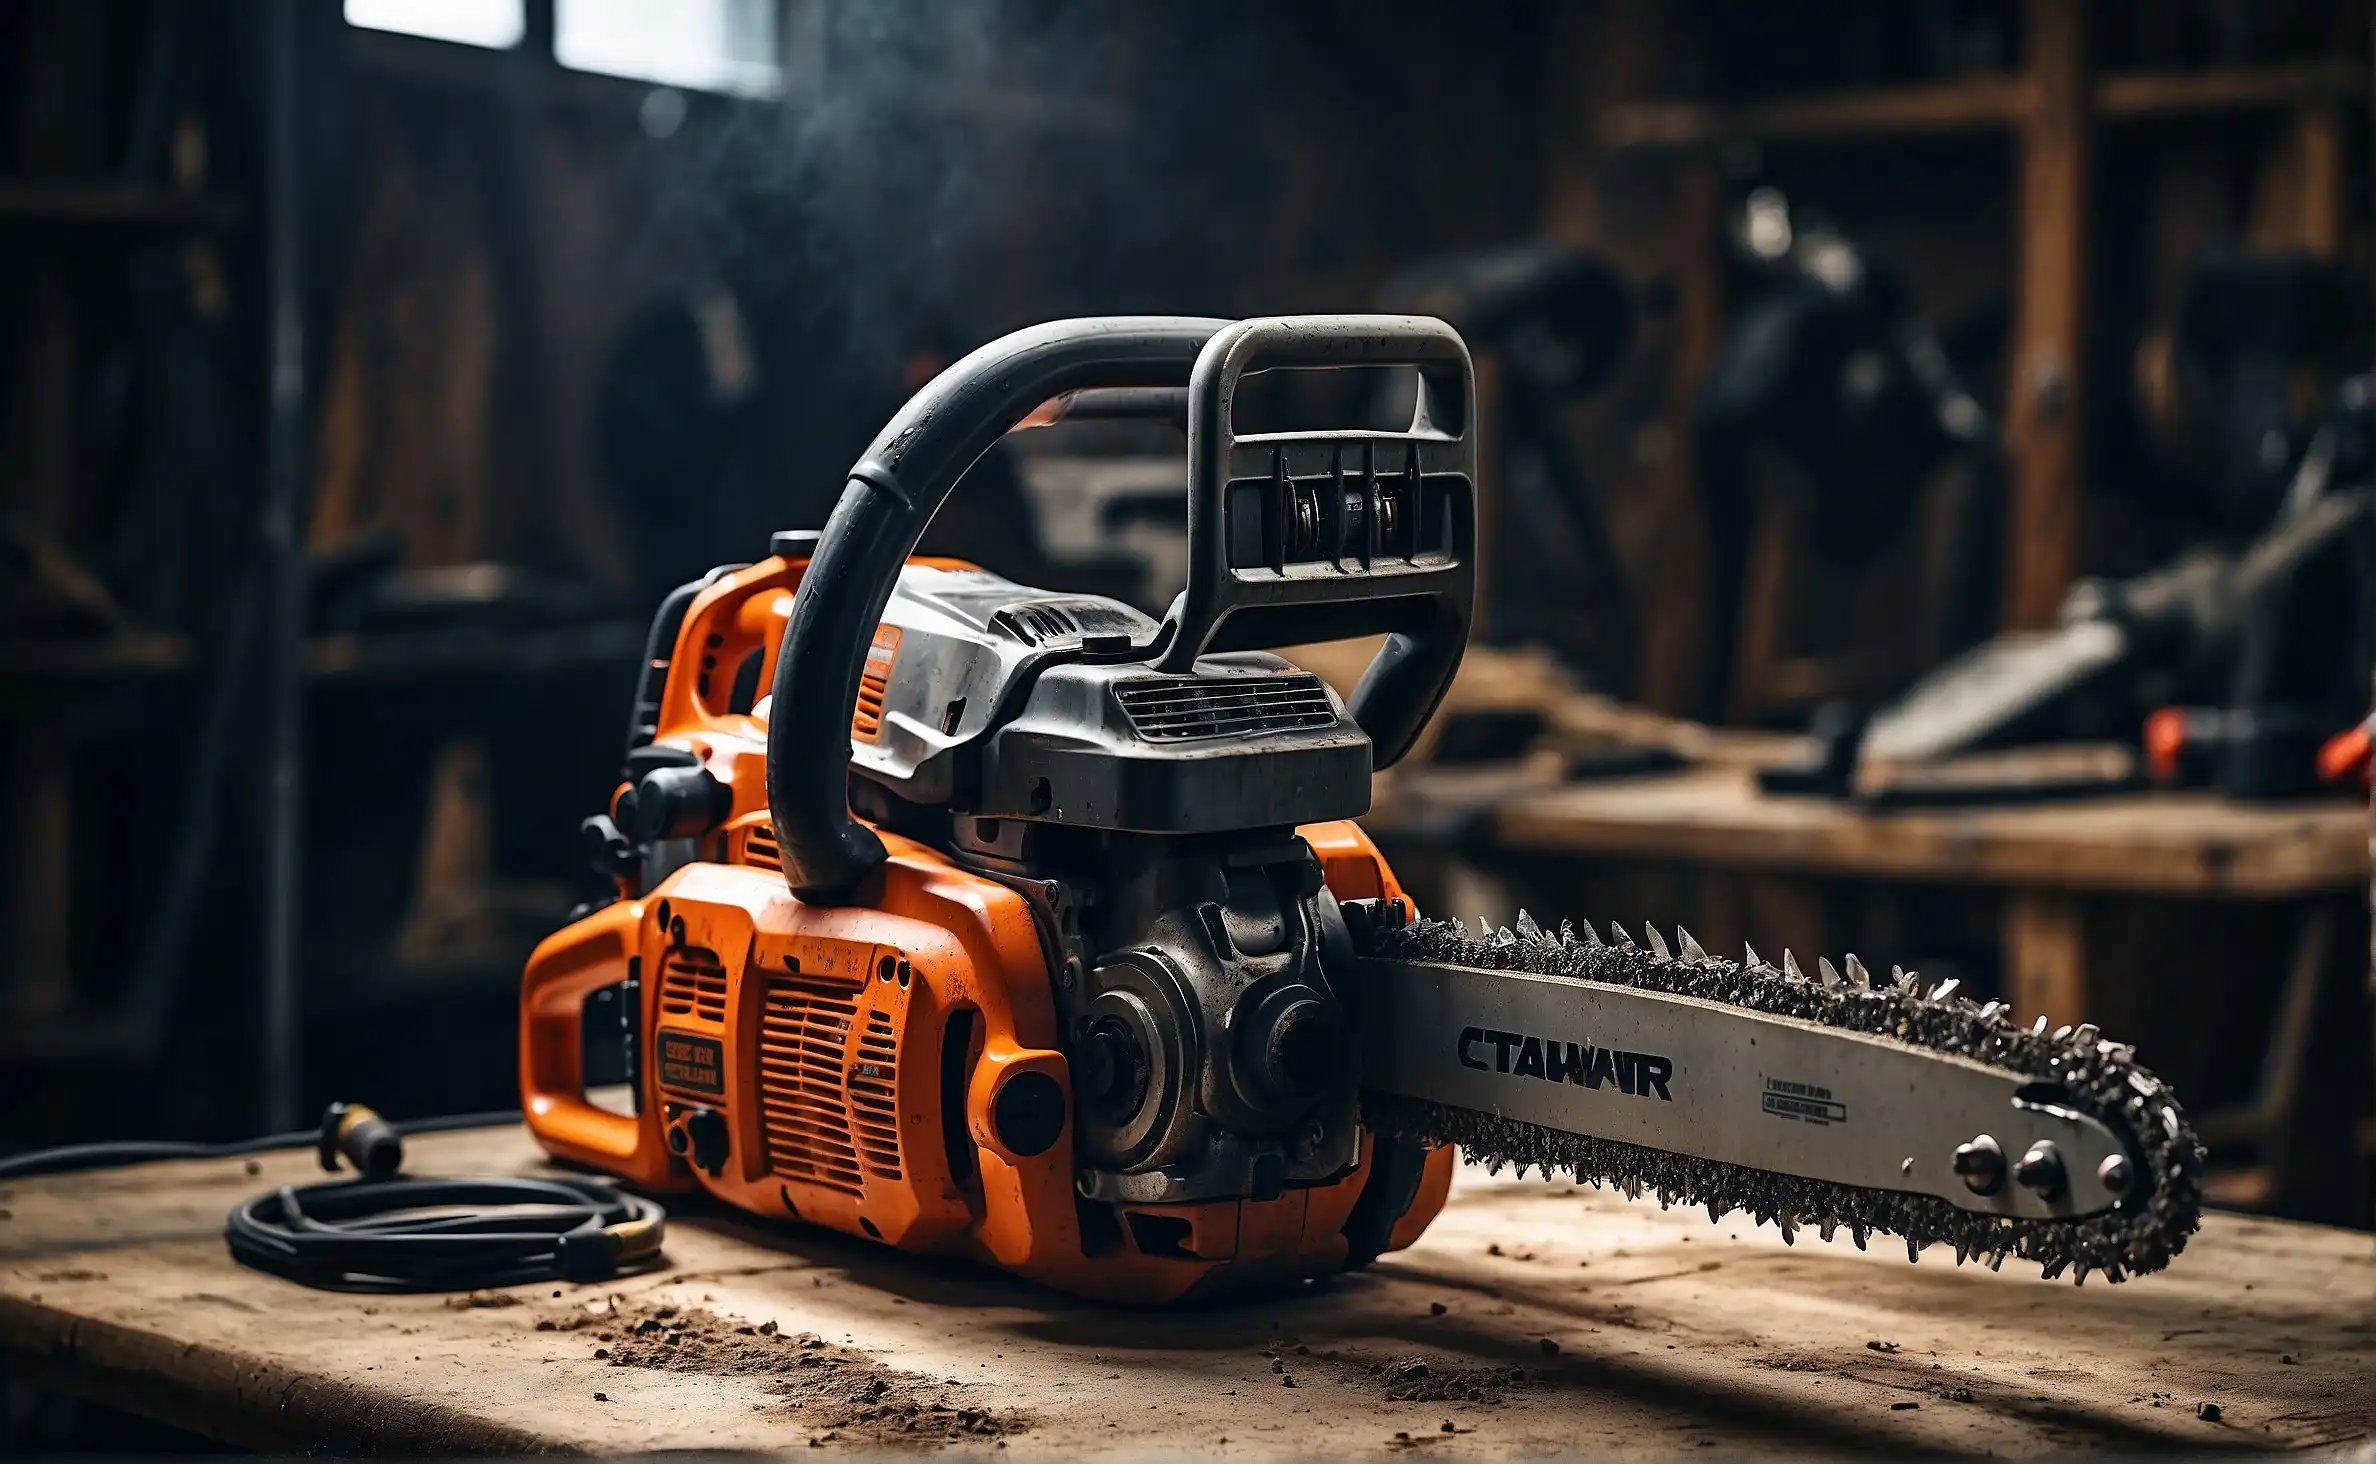 Chainsaw with brushless motor